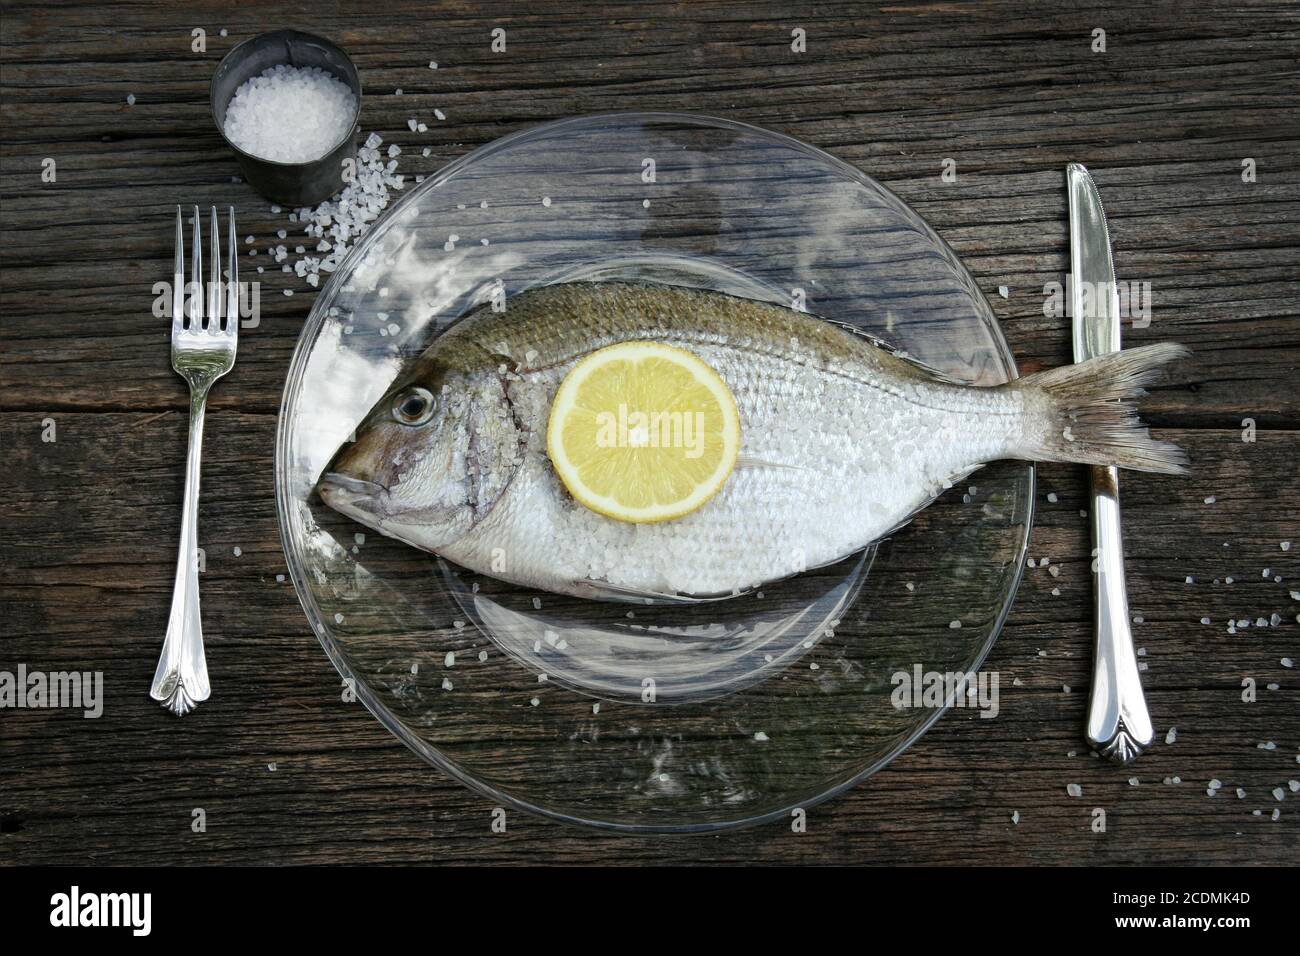 Raw fish on plate with knife and fork Stock Photo